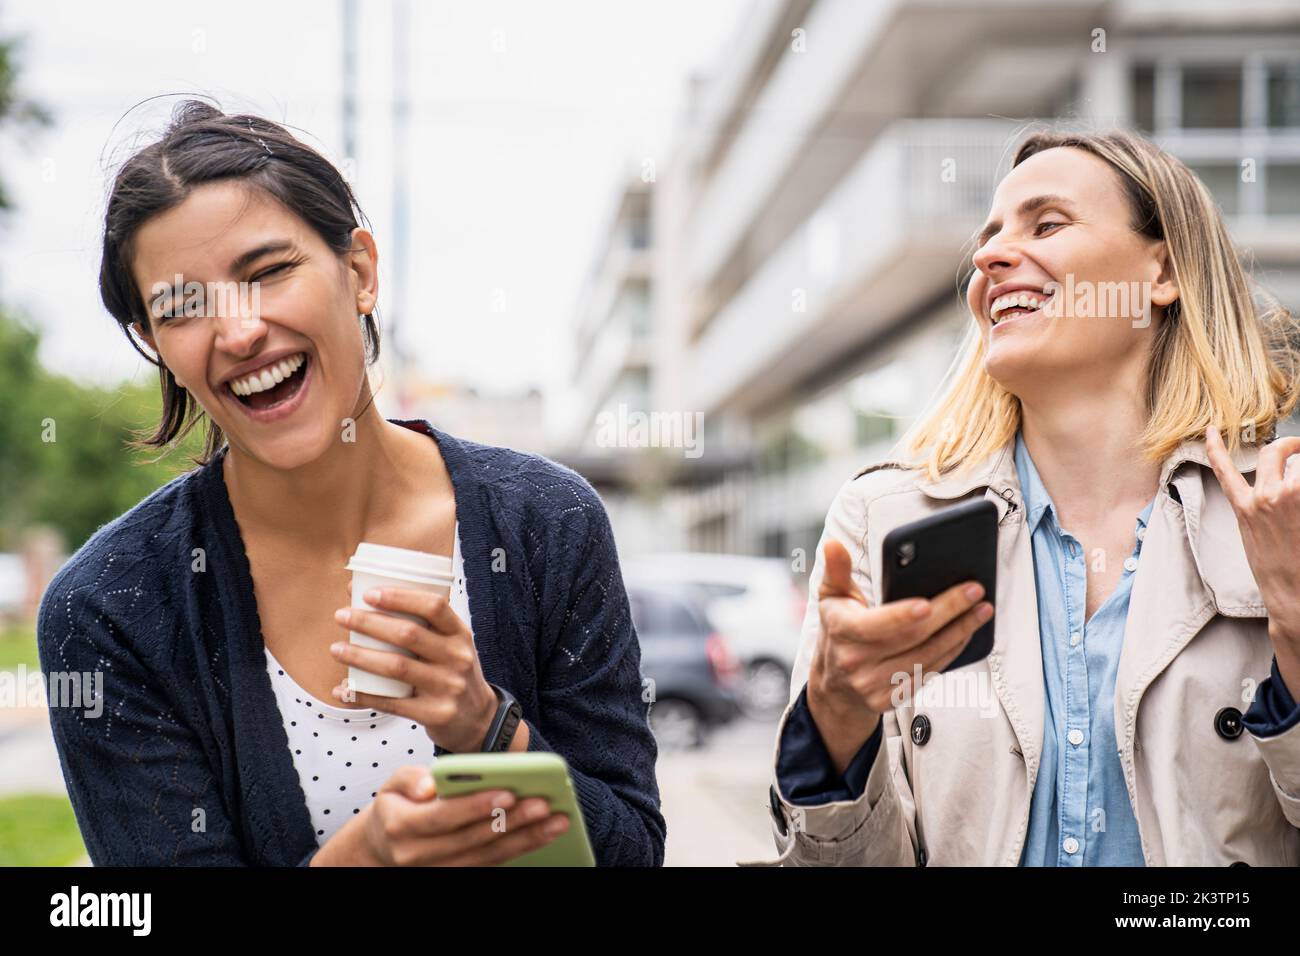 Medium shot of two female entrepreneurs laughing and enjoying content found on social media while working outdoors Stock Photo